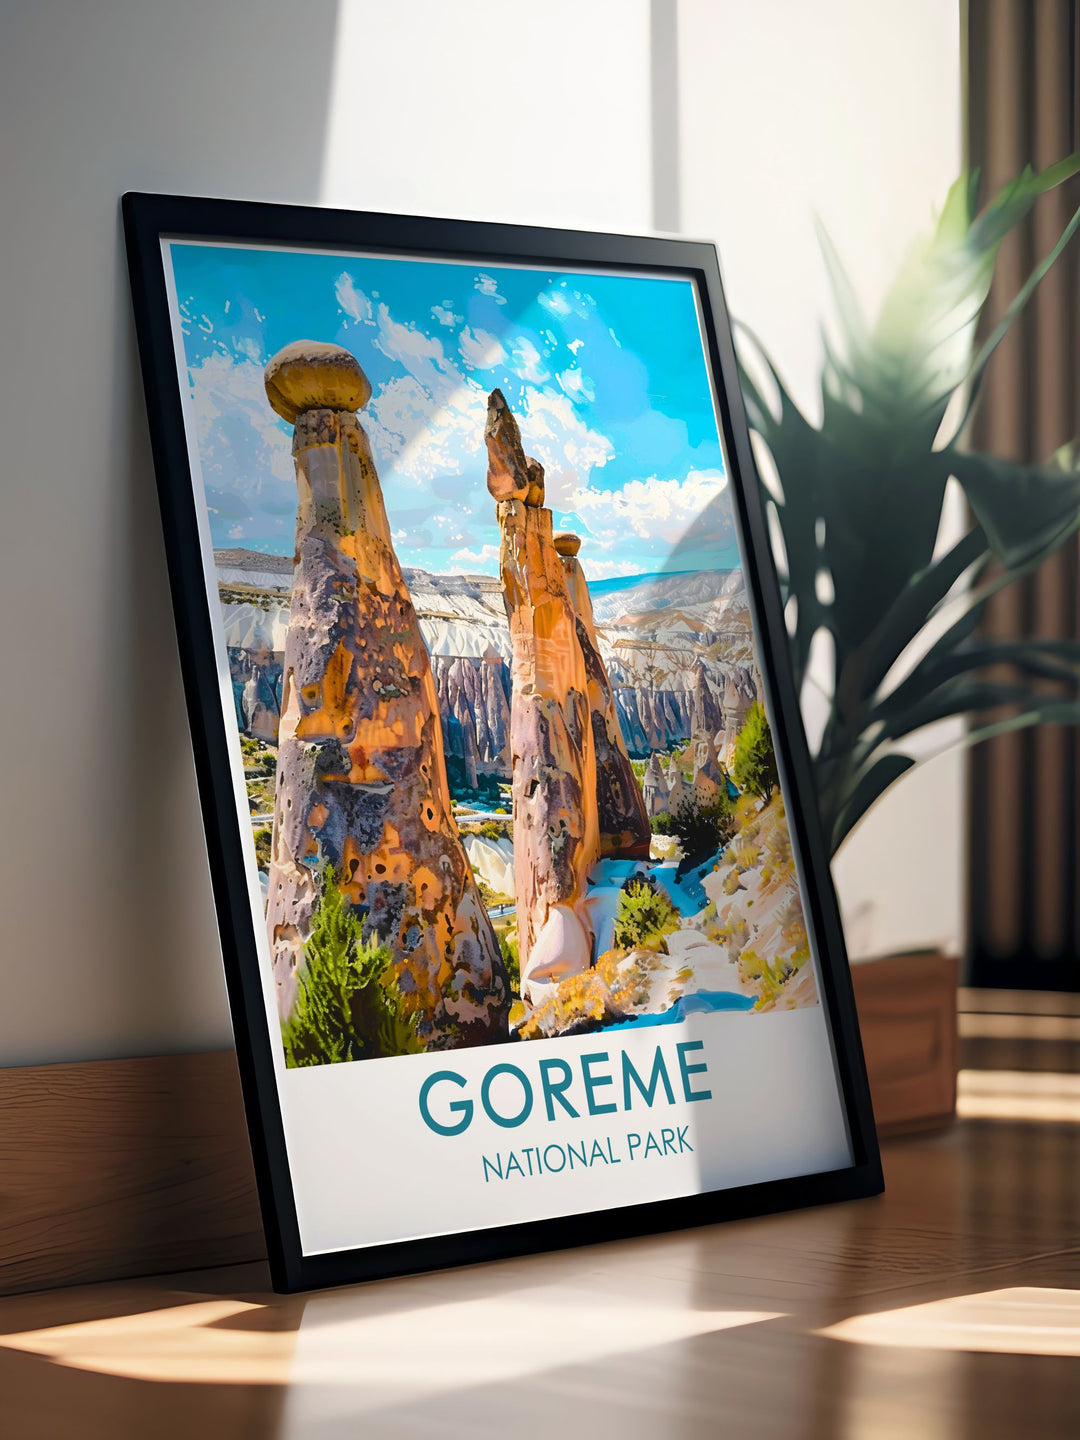 Featuring the mystical Fairy Chimneys of Goreme National Park in Cappadocia, Turkey, this poster highlights the surreal rock formations and vibrant sunrise, ideal for enhancing your space with the allure of Turkish landscapes.